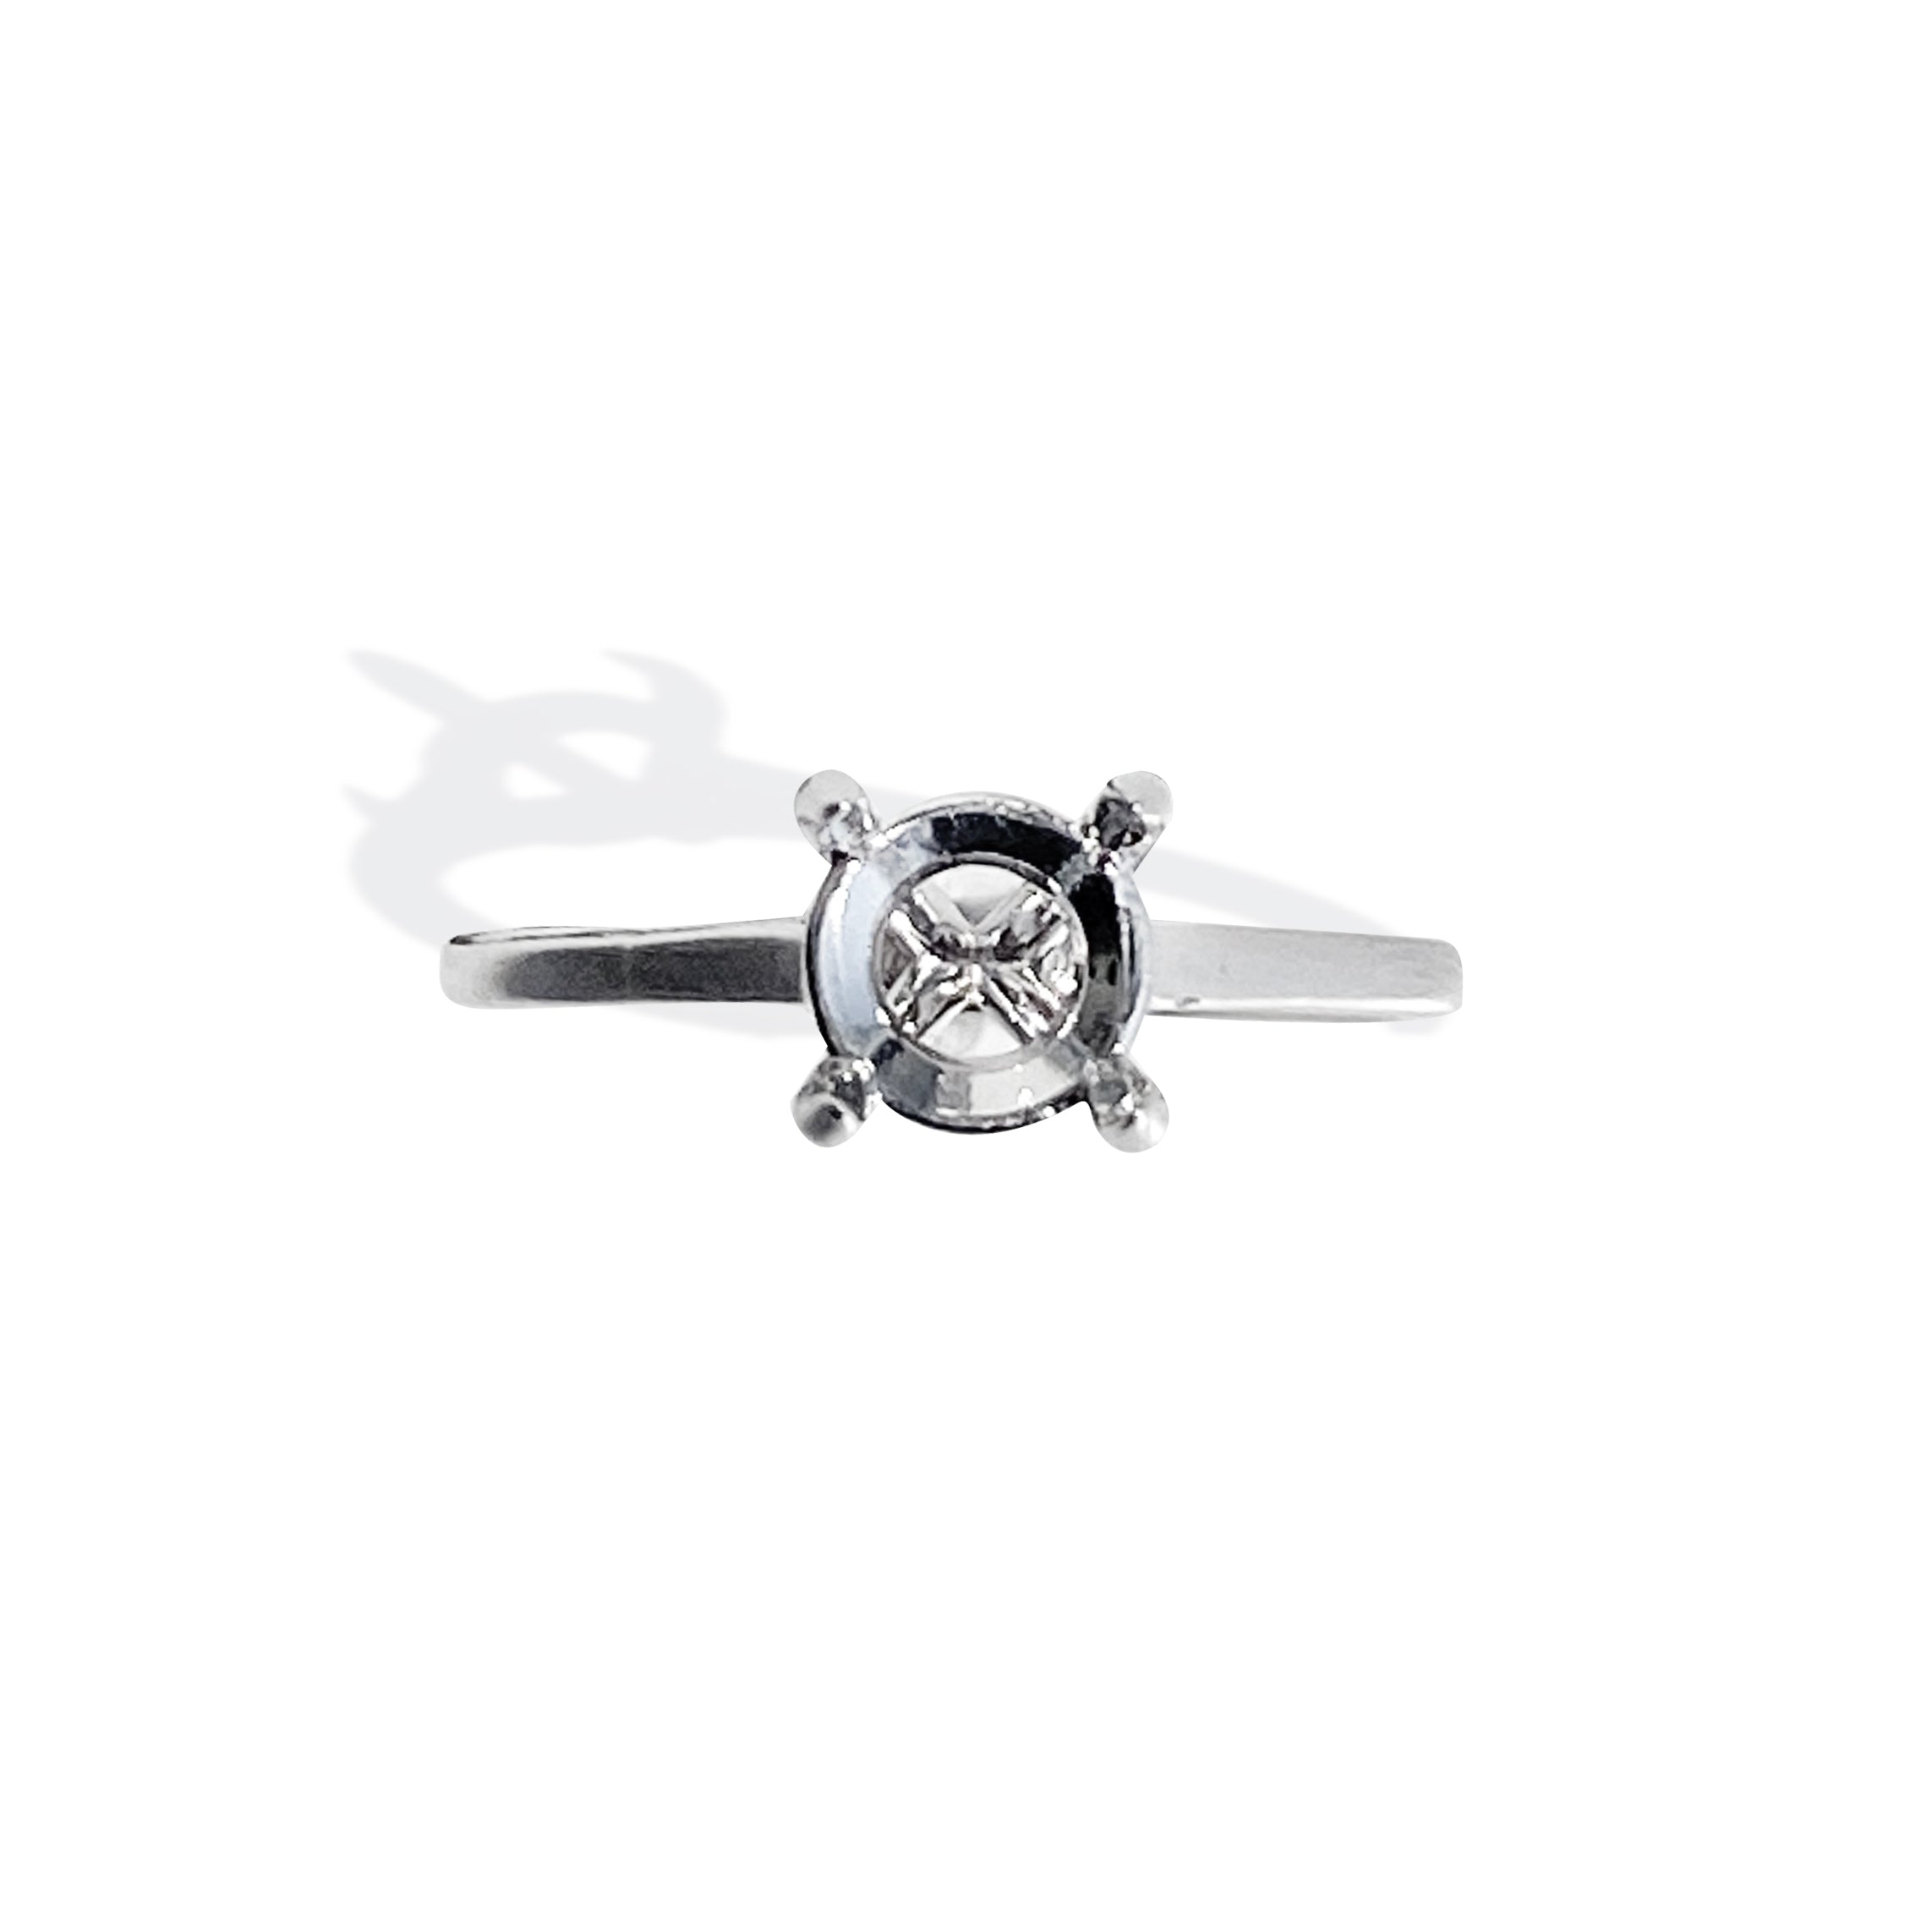 4-Prong Solitaire Diamond Setting